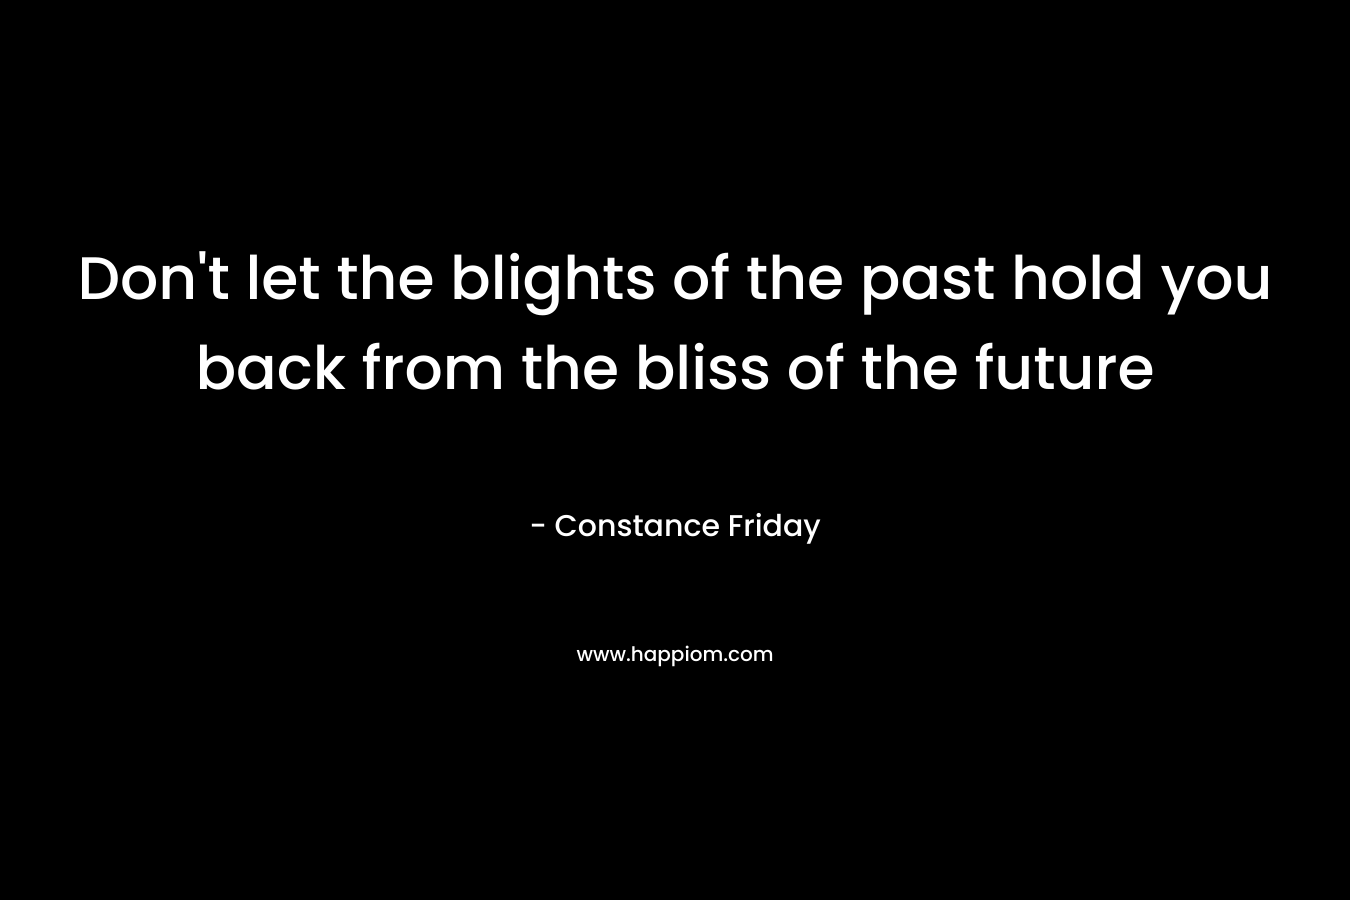 Don't let the blights of the past hold you back from the bliss of the future